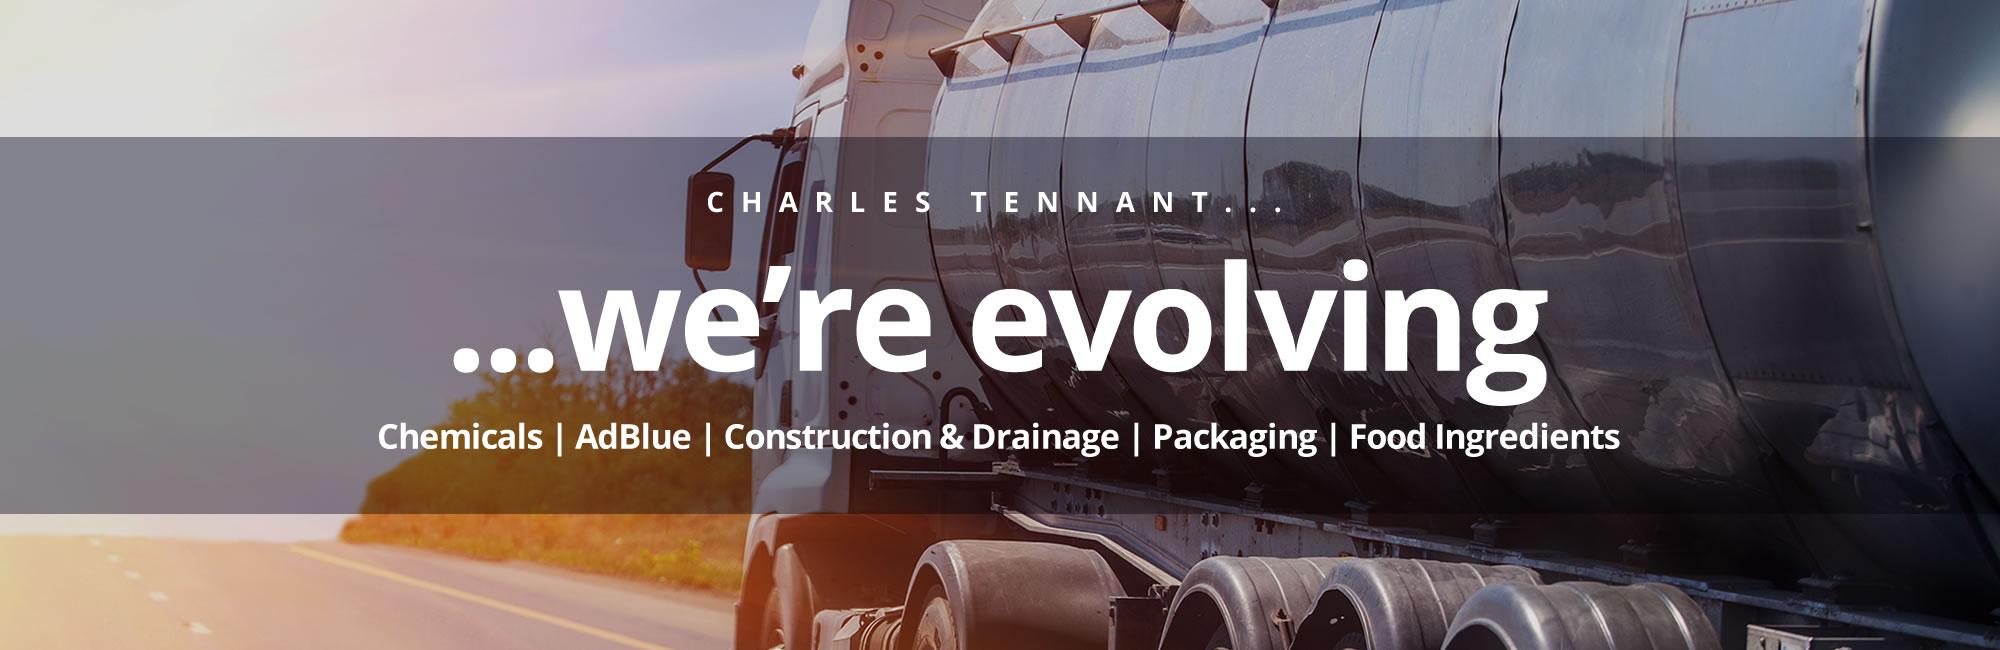 Charles Tennant is a leading independent distributor of chemicals based in the UK